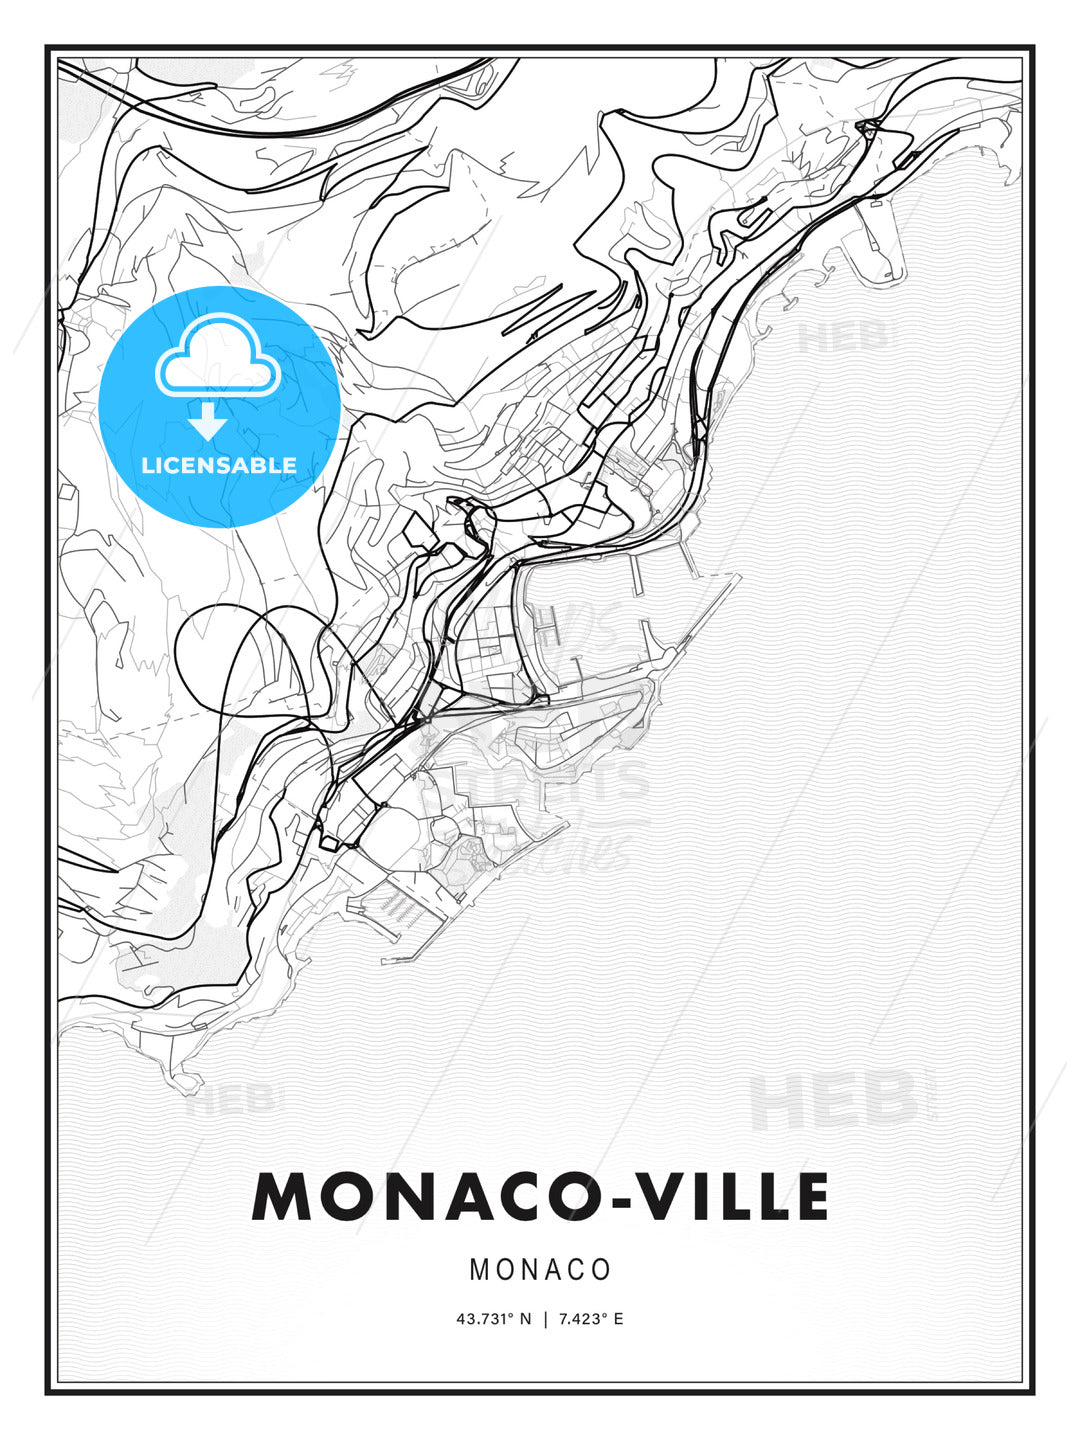 Monaco-Ville, Monaco, Modern Print Template in Various Formats - HEBSTREITS Sketches